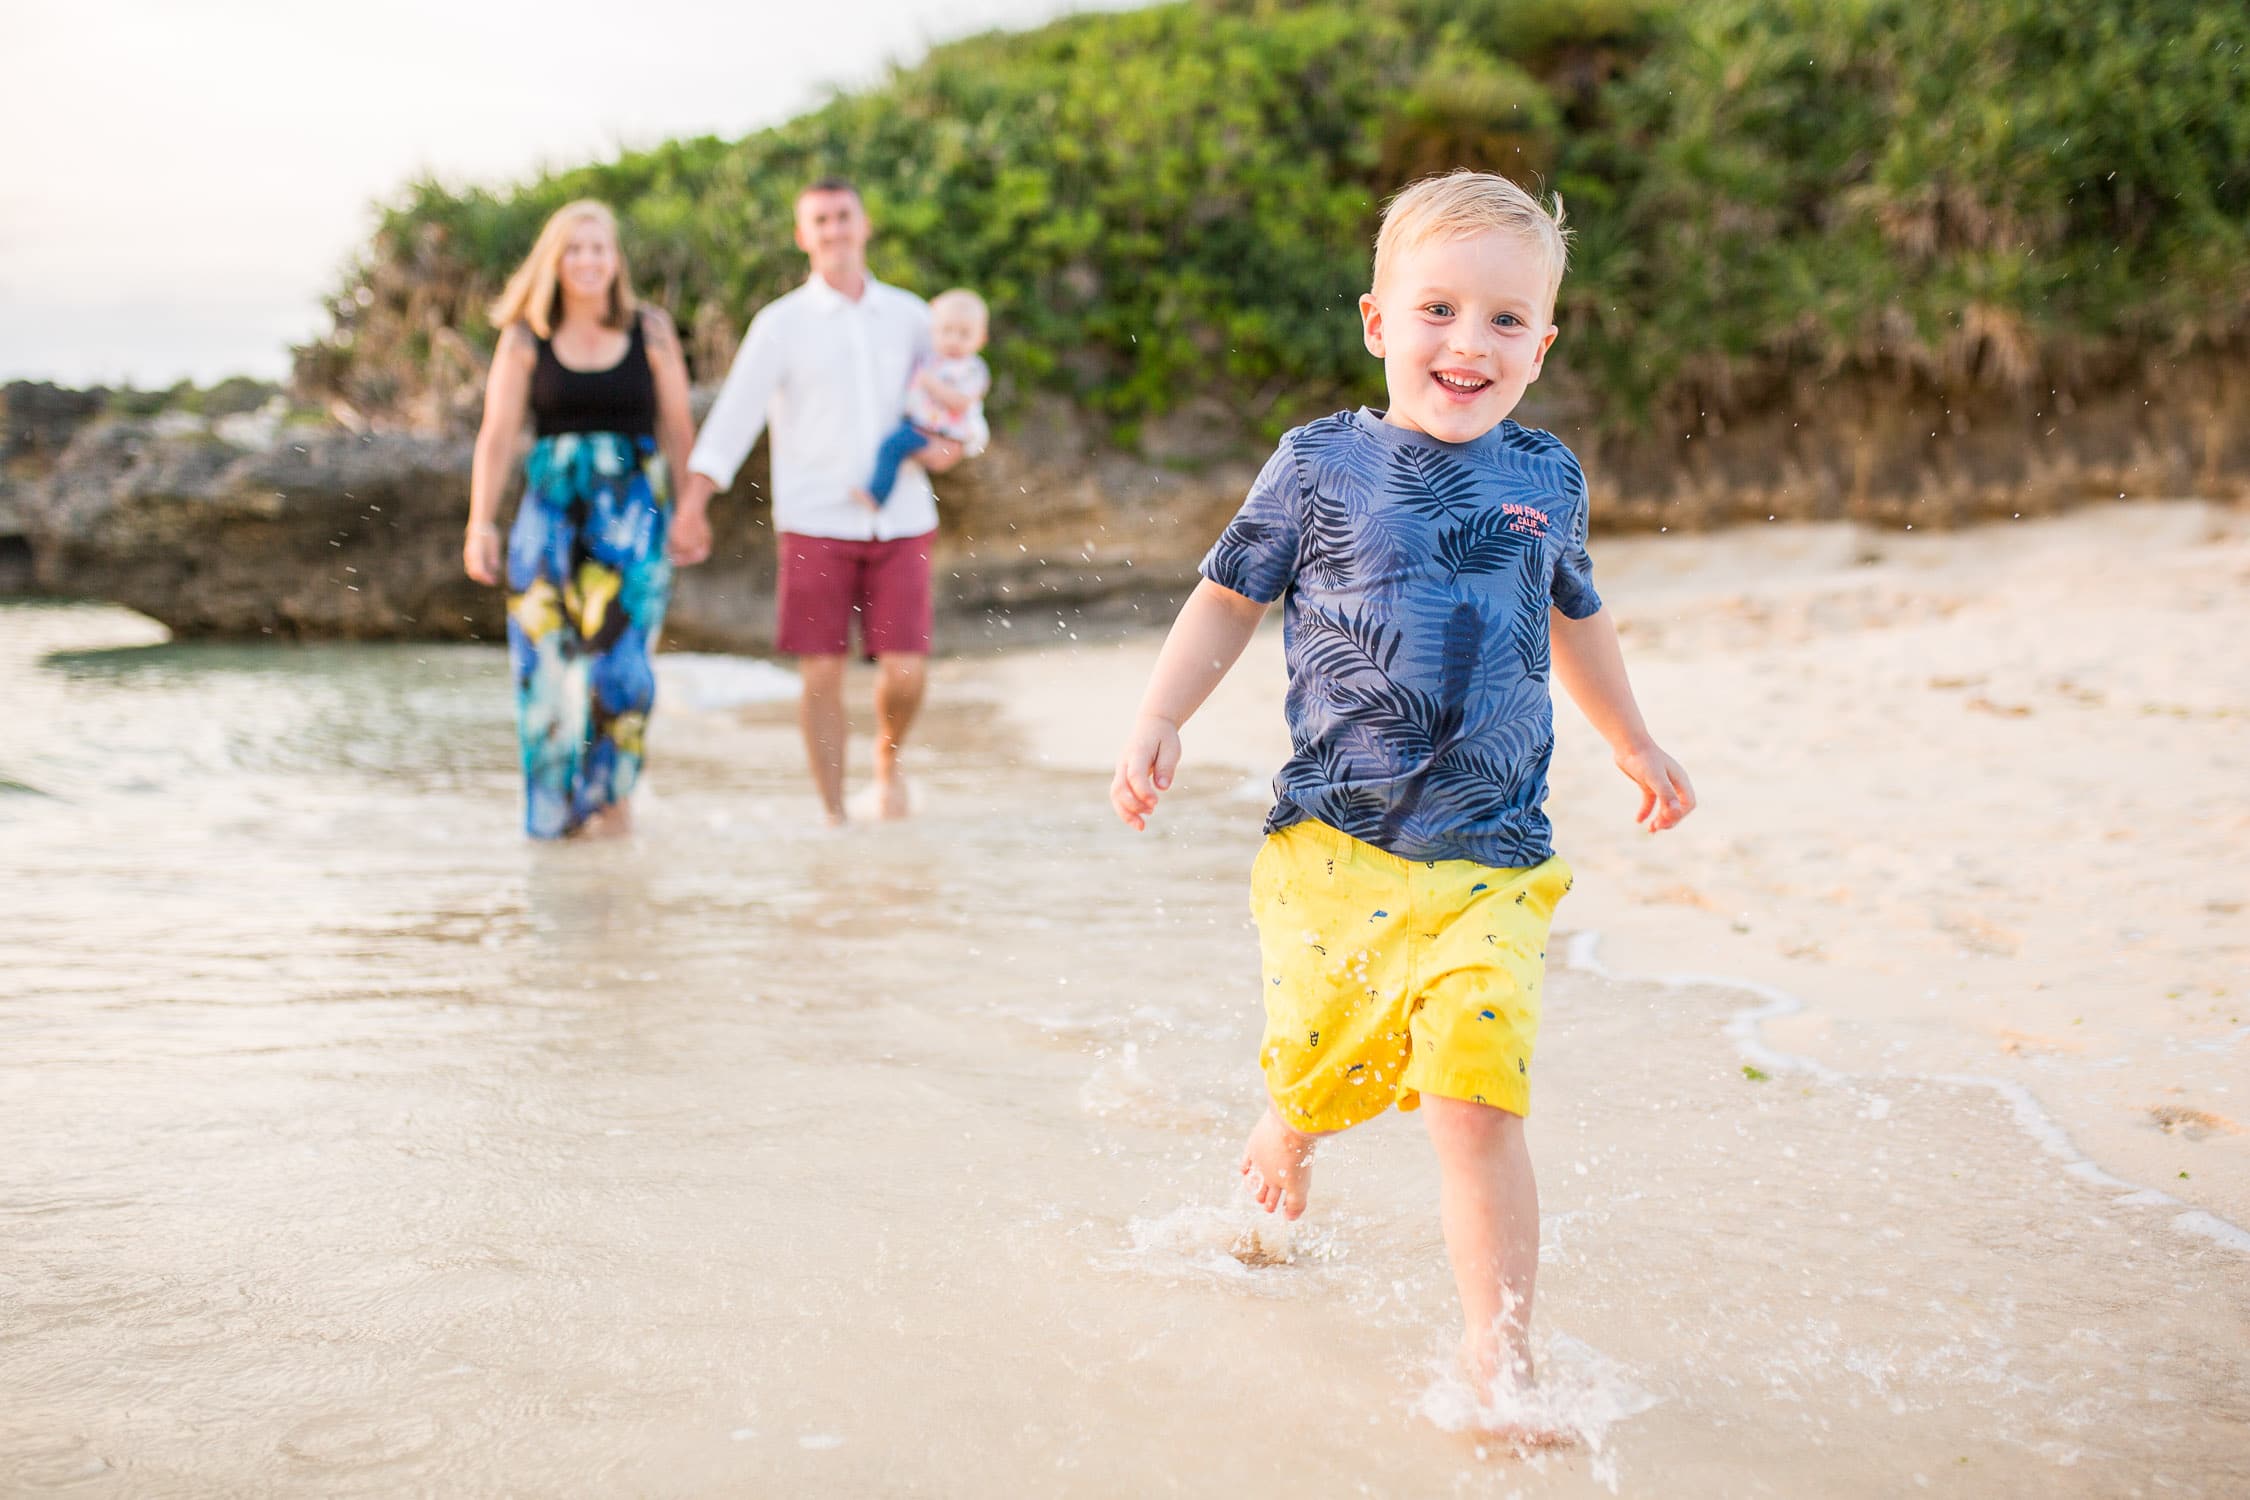 Fun, stress free family photos with Alison Bell, Photographer on the beach in Okinawa, Japan.